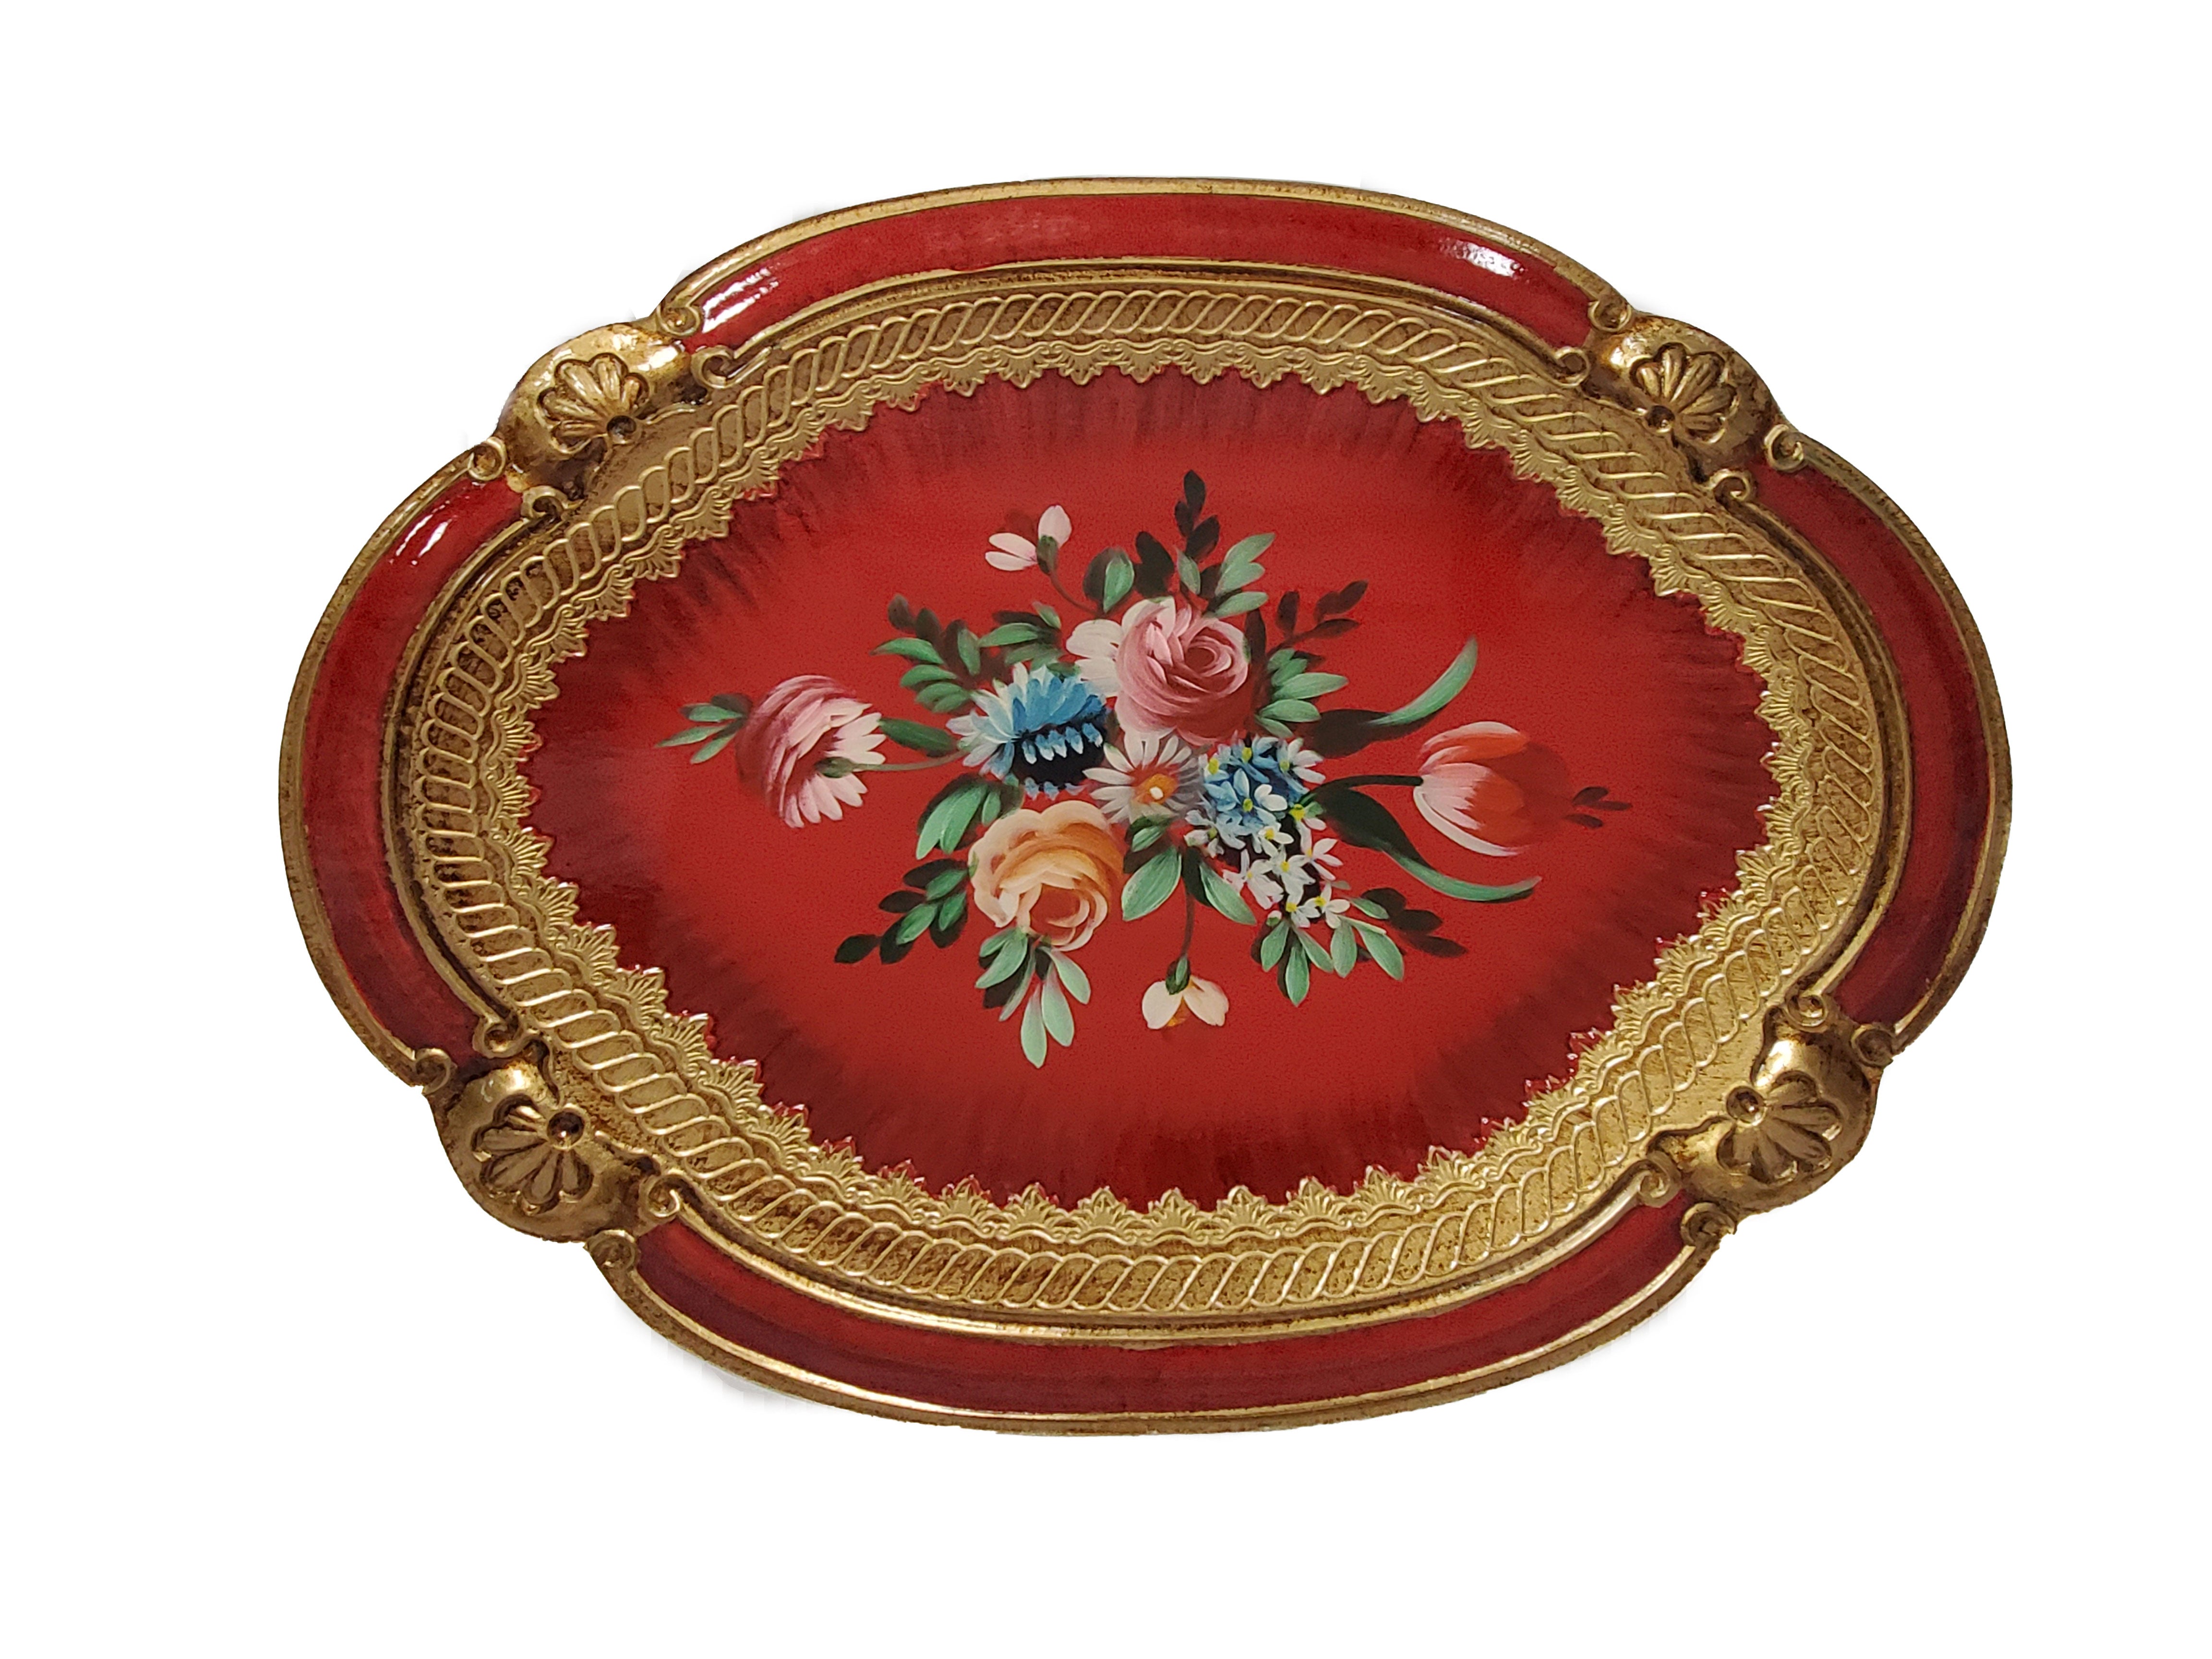 Florentine Tray Oval Wood Hand Painted in Firenze Italy 18"L x 14.5"W - Royal Gift